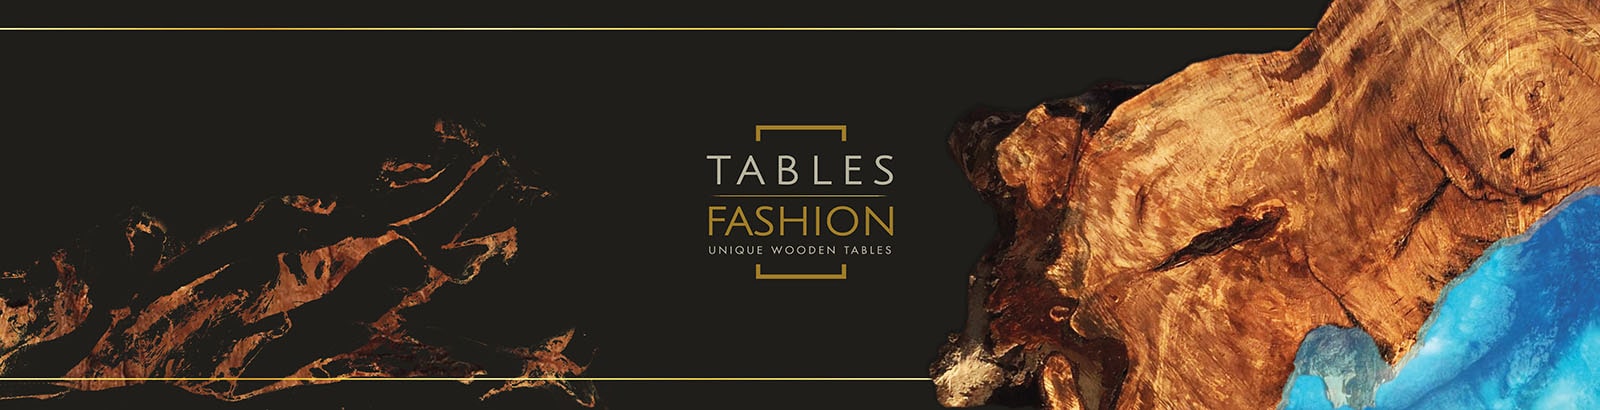 Tables Fashion Epoxy Resin Wood Tables